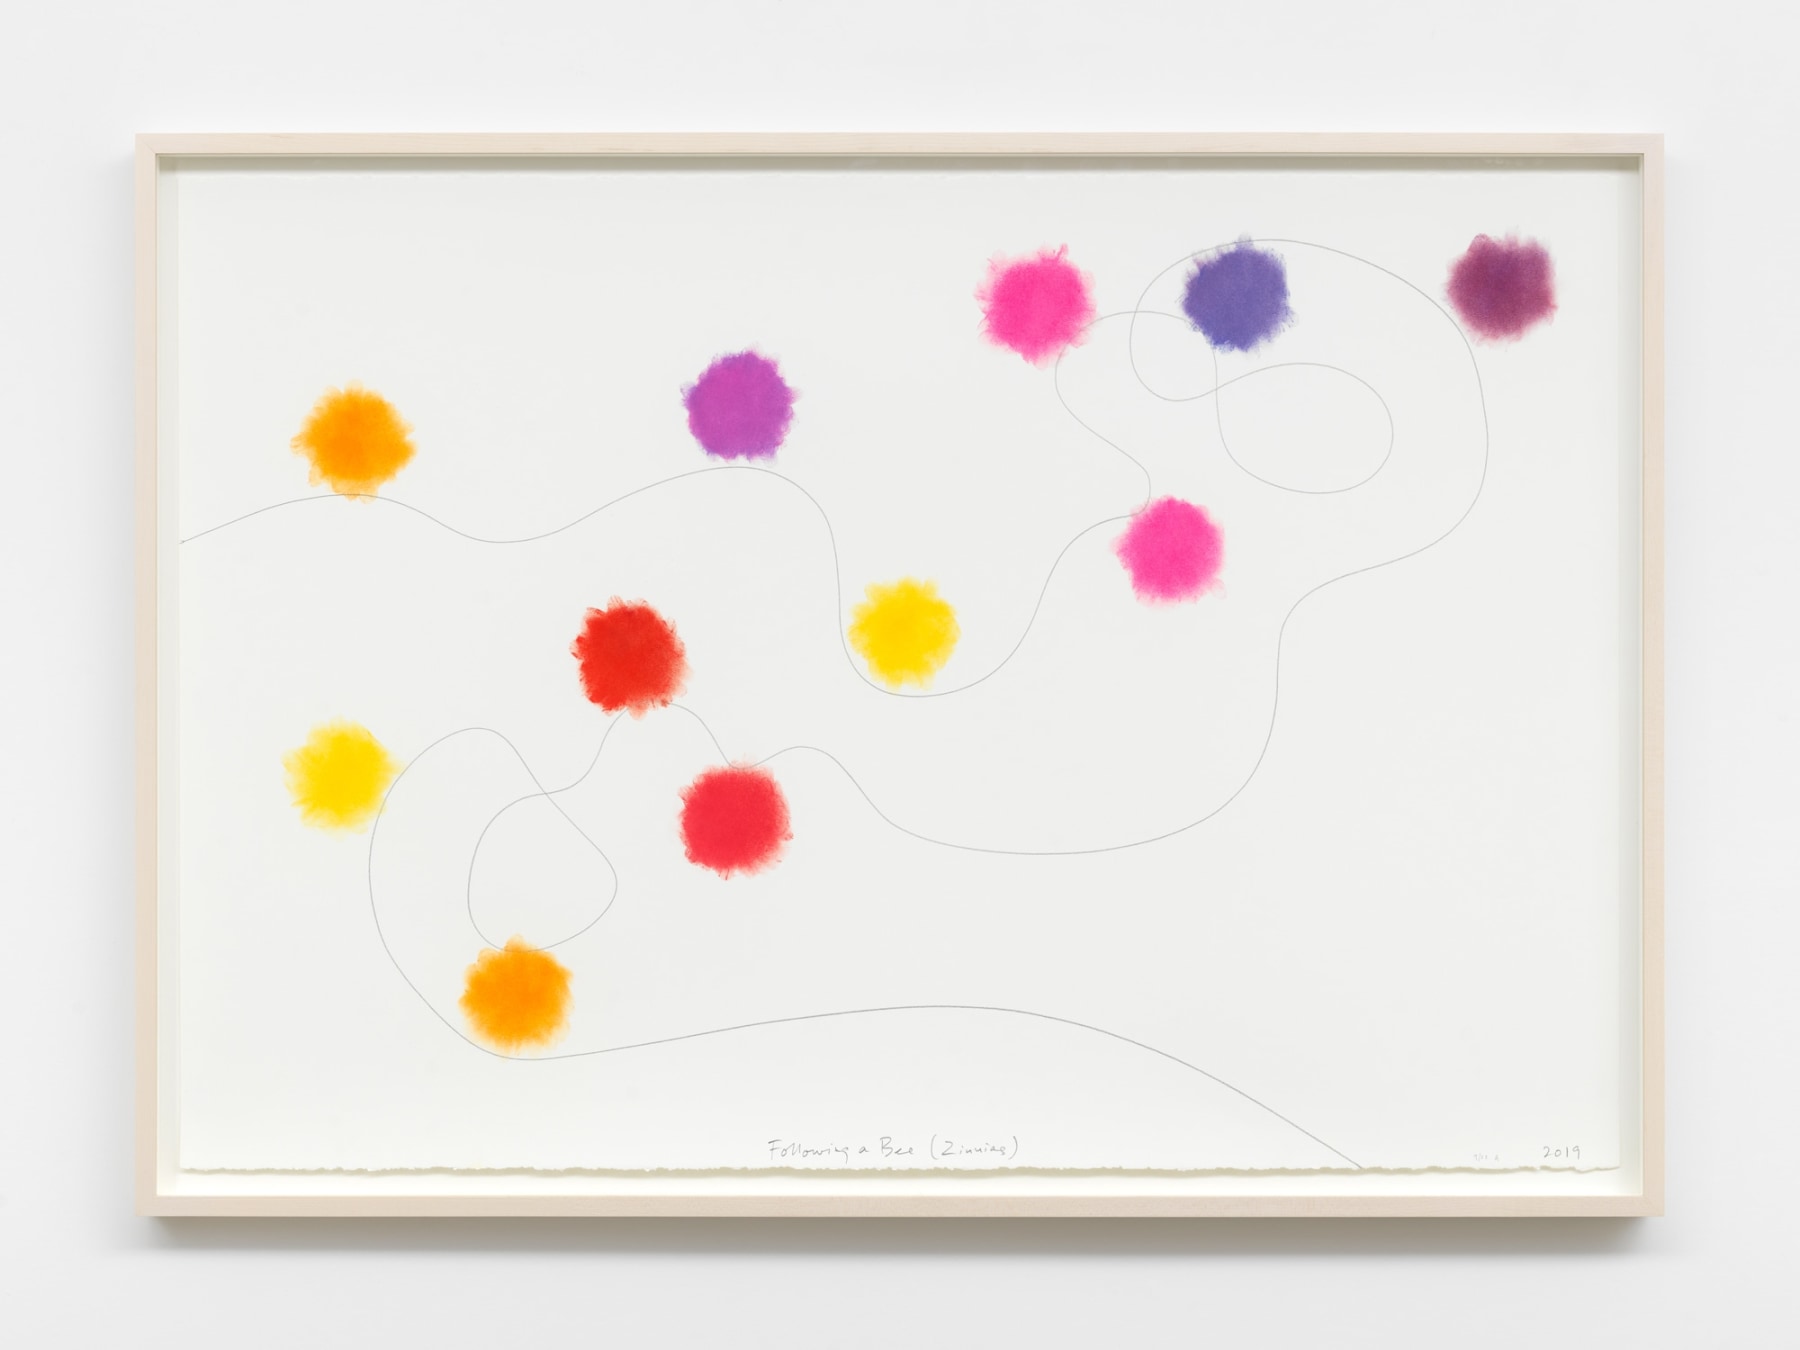 Colored Pastel dots and a single pencil swirl on paper